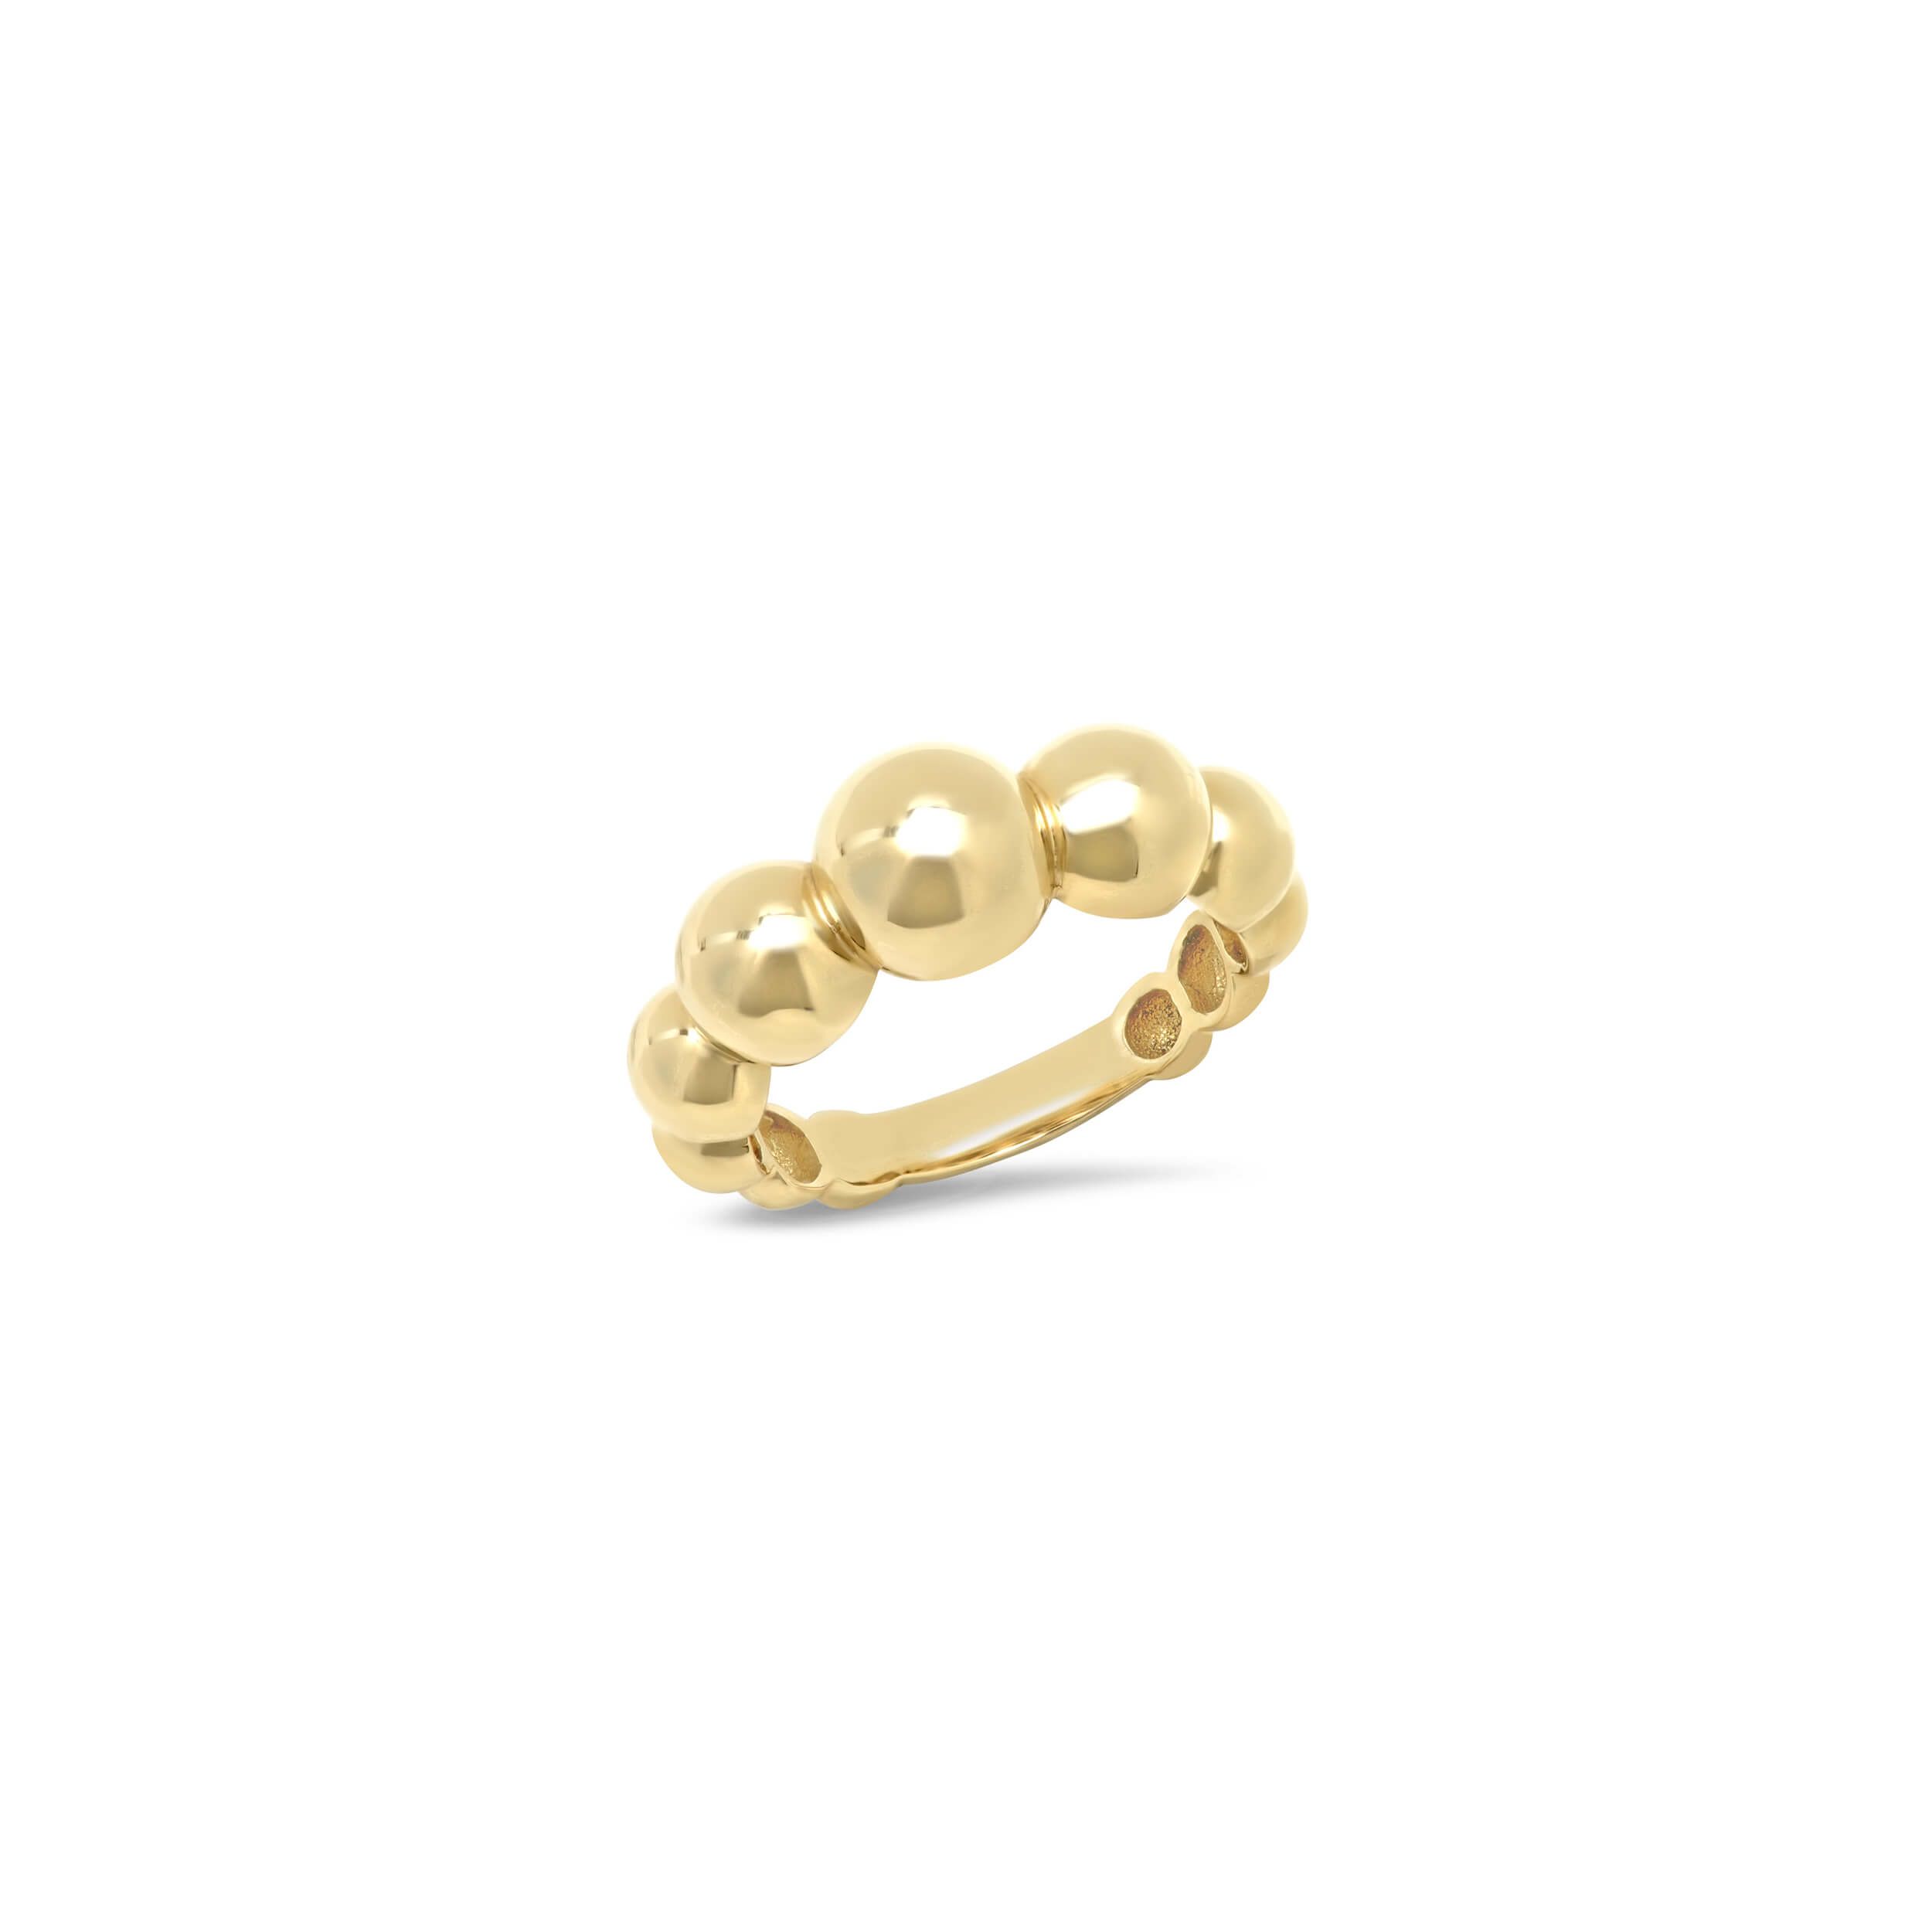 Moondance Jewelry Gallery Intended For Bubbles Gold Band Rings (View 5 of 25)